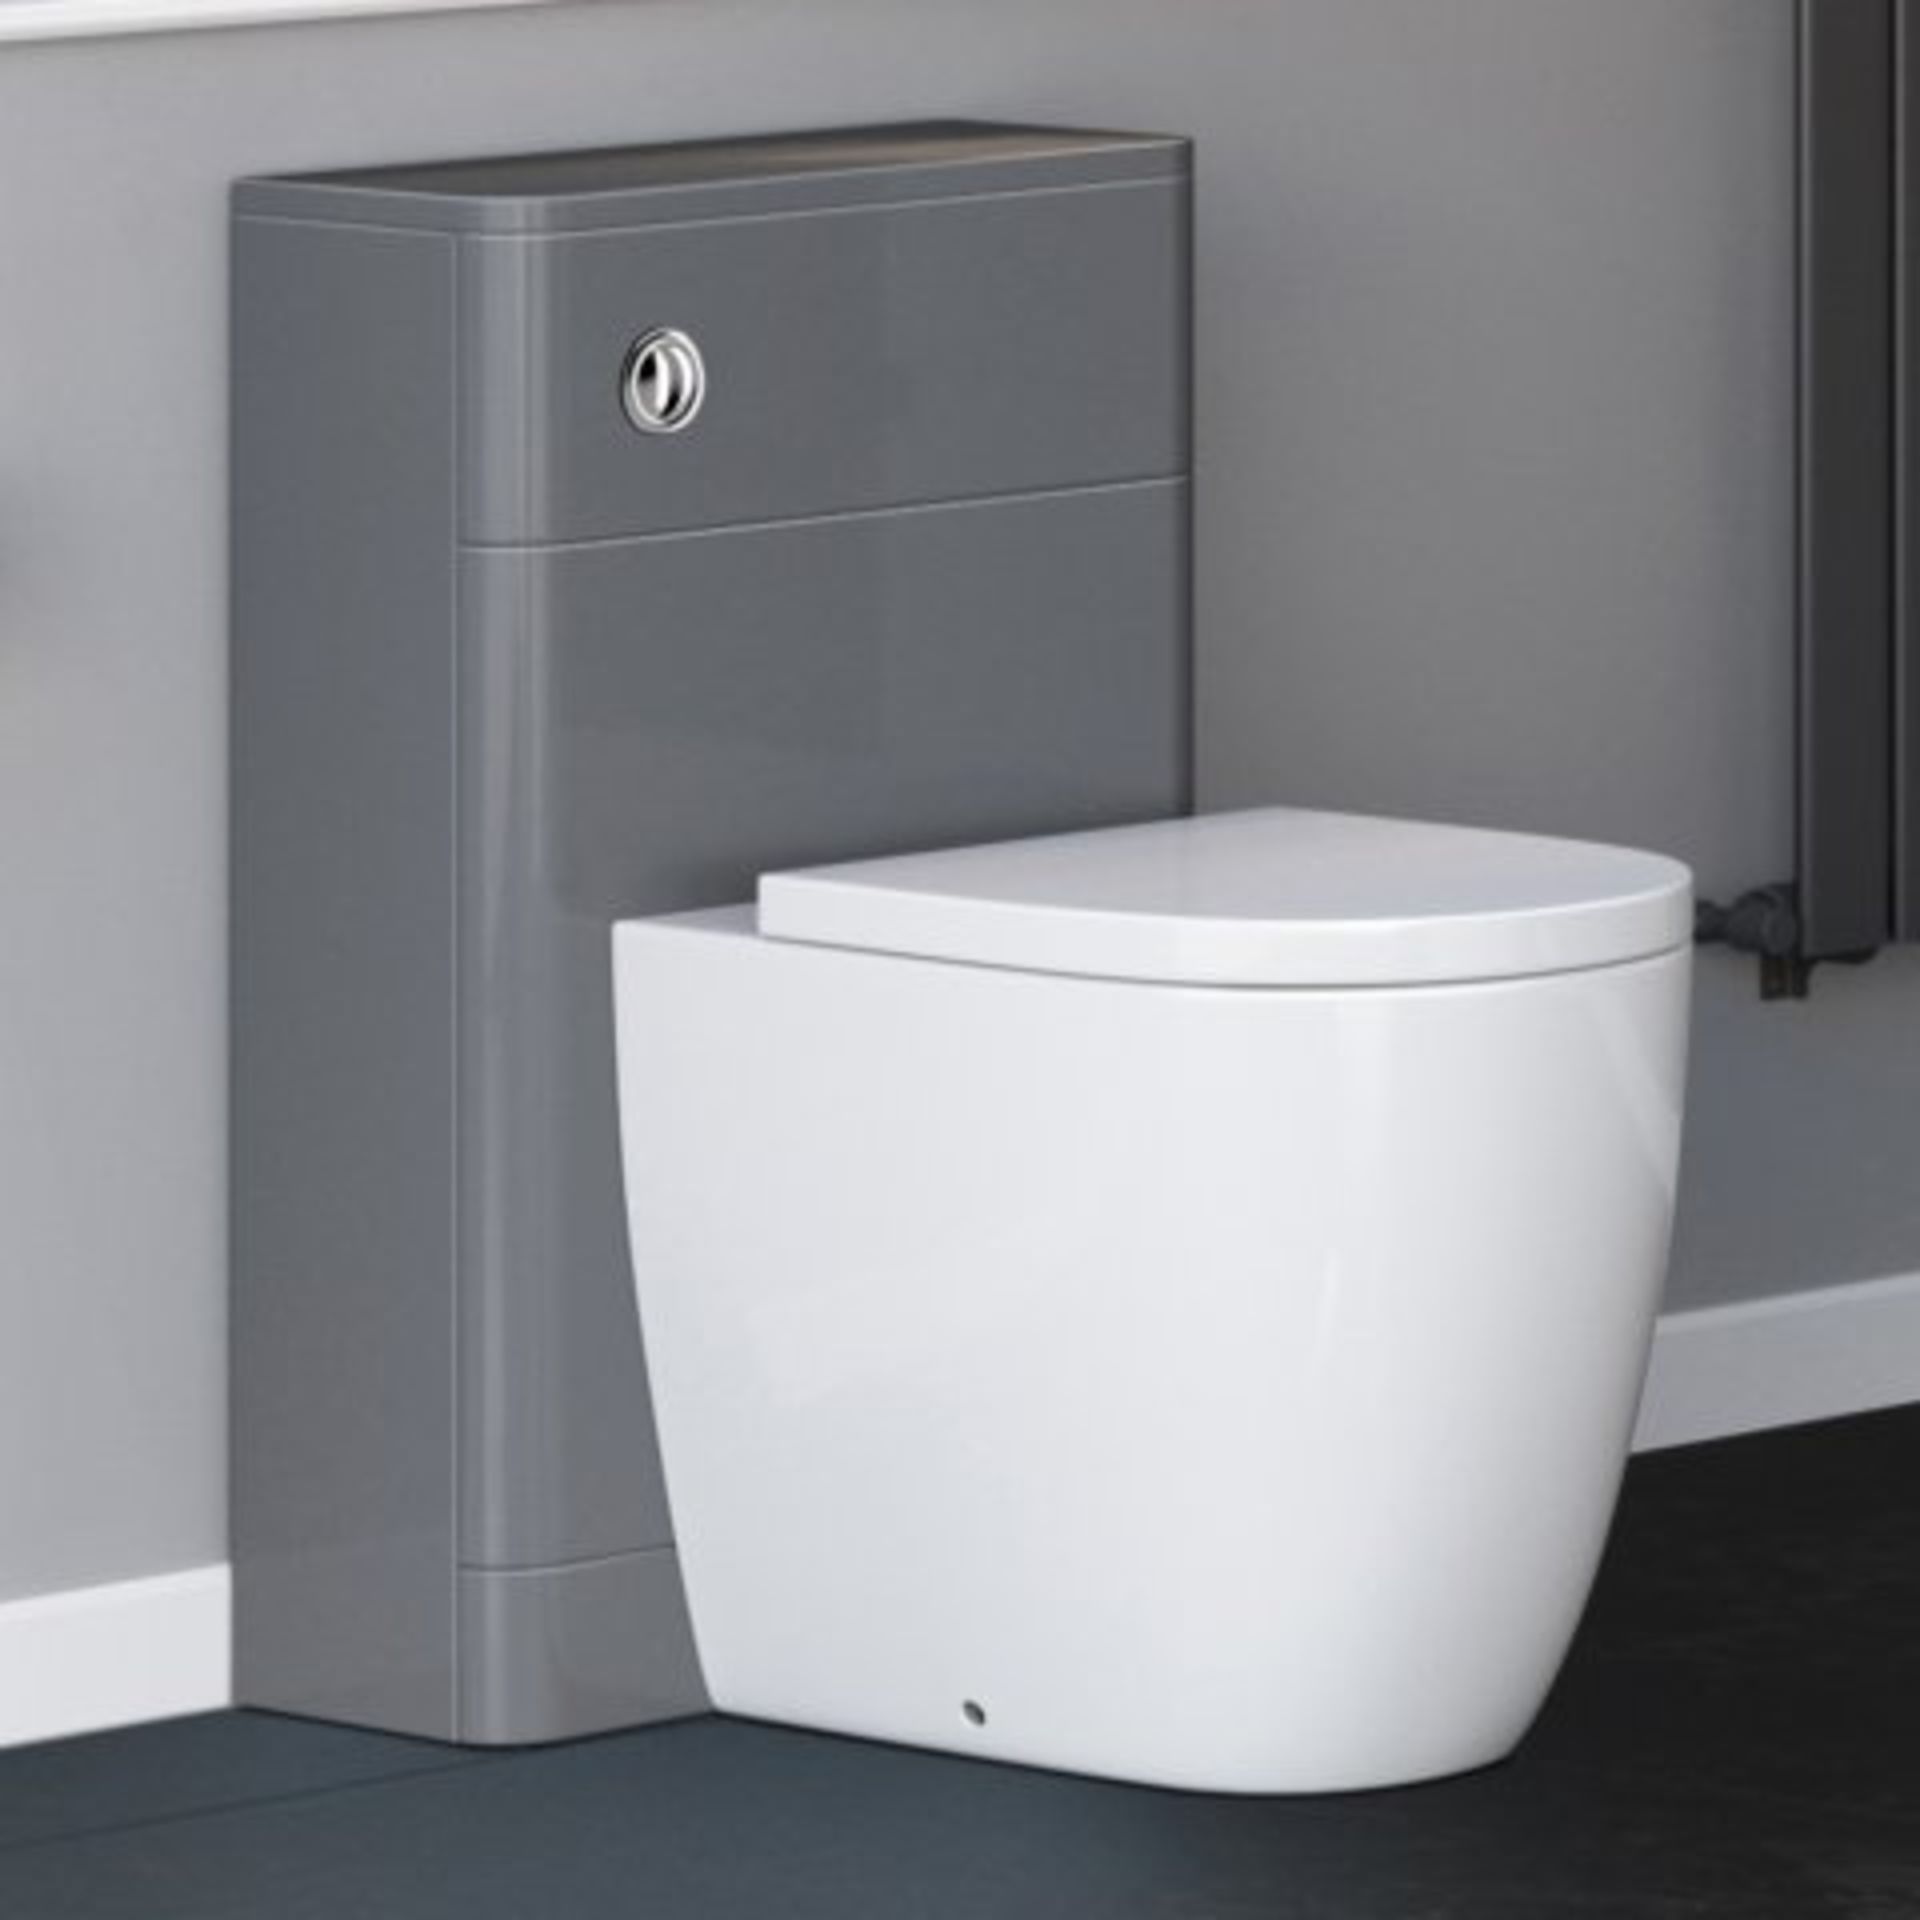 (66) 500mm Gloss Grey Back To Wall Toilet Unit. RRP £143.99. This Gloss Grey 500mm Back To Wall - Image 2 of 4